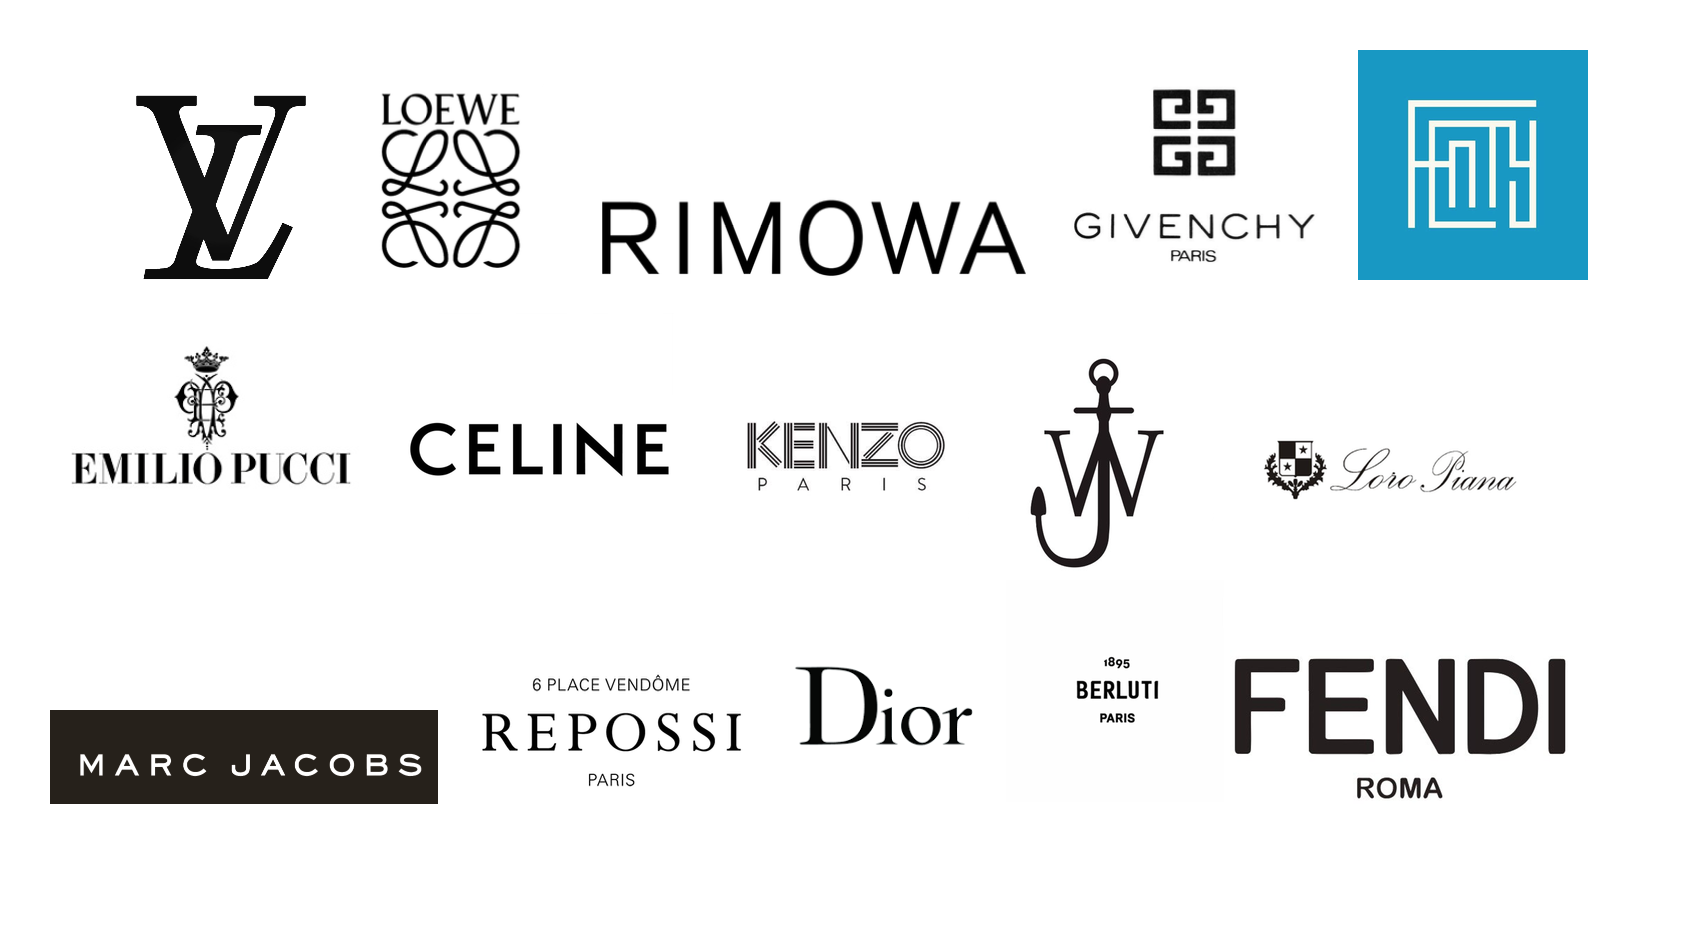 Luxury Group LVMH Joins Top-Tier French Sponsors Of The 2024 Paris